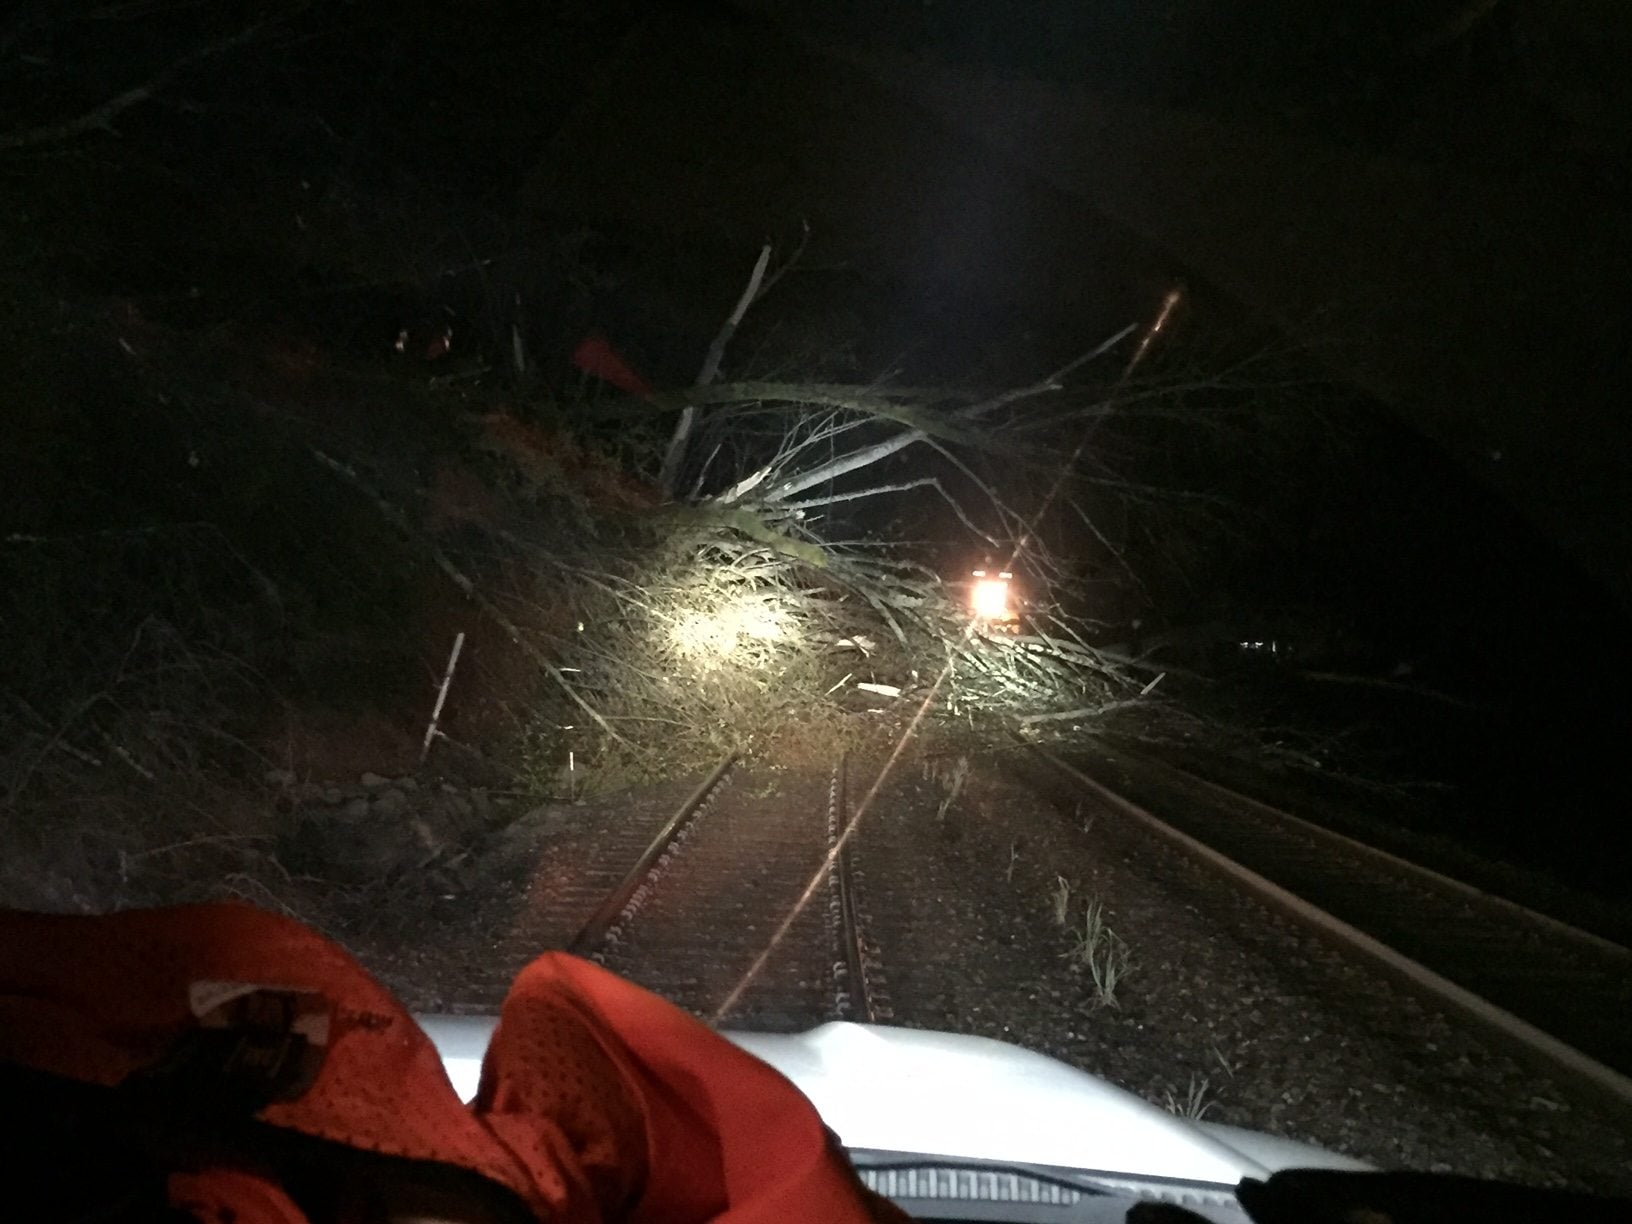 About 50 trees, some about 60-70 tall, blocked traffic over BNSF Railway lines north of Seattle over the weekend. Since Friday, railway crews have been busy addressing high water, slides and weather damage.